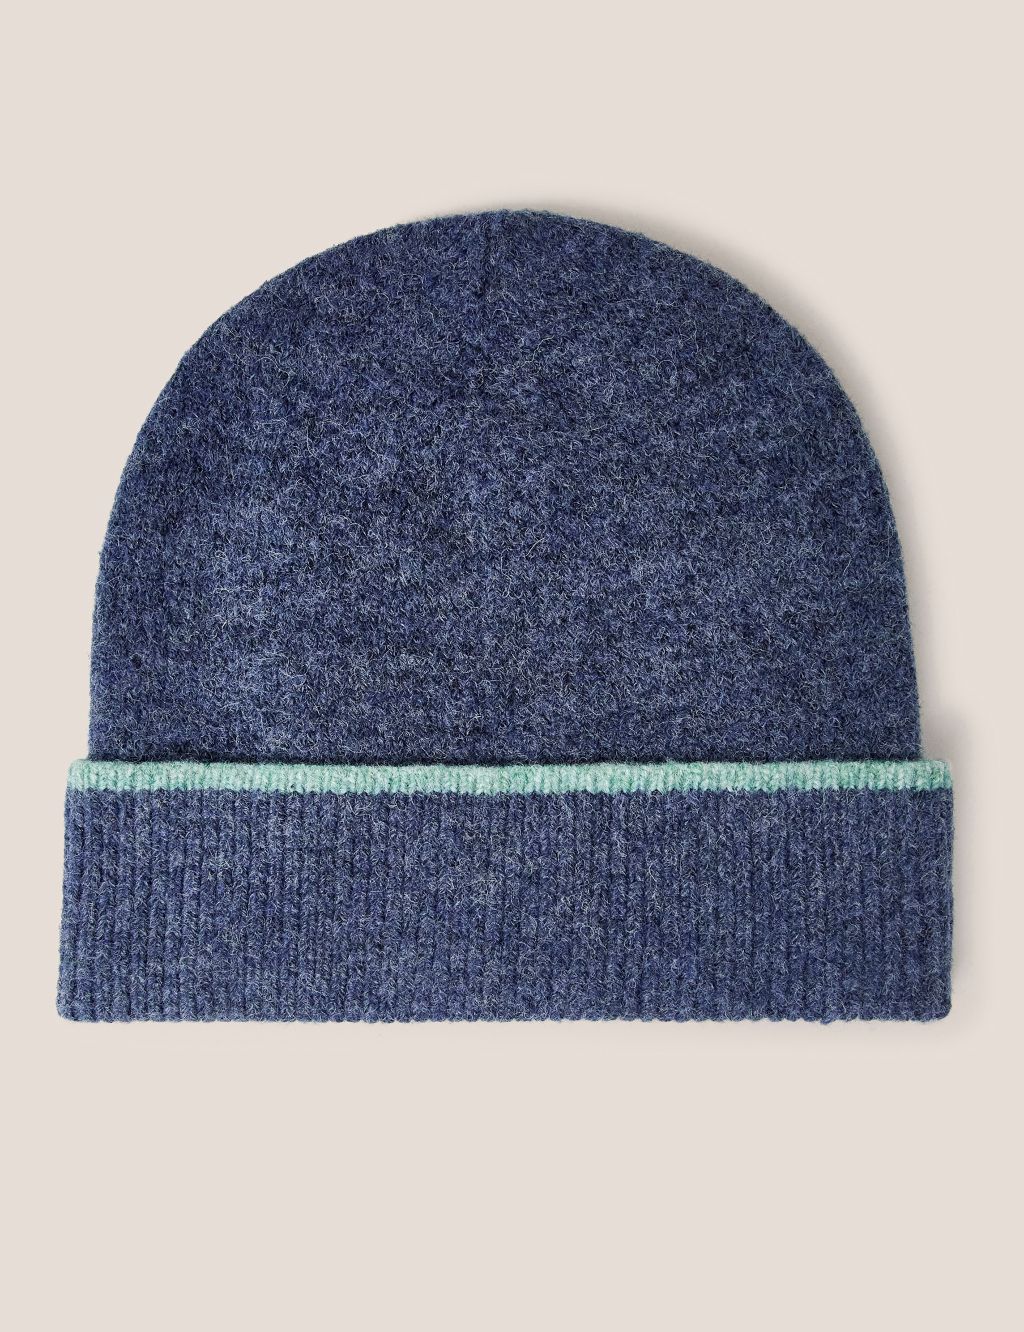 Knitted Beanie Hat image 1